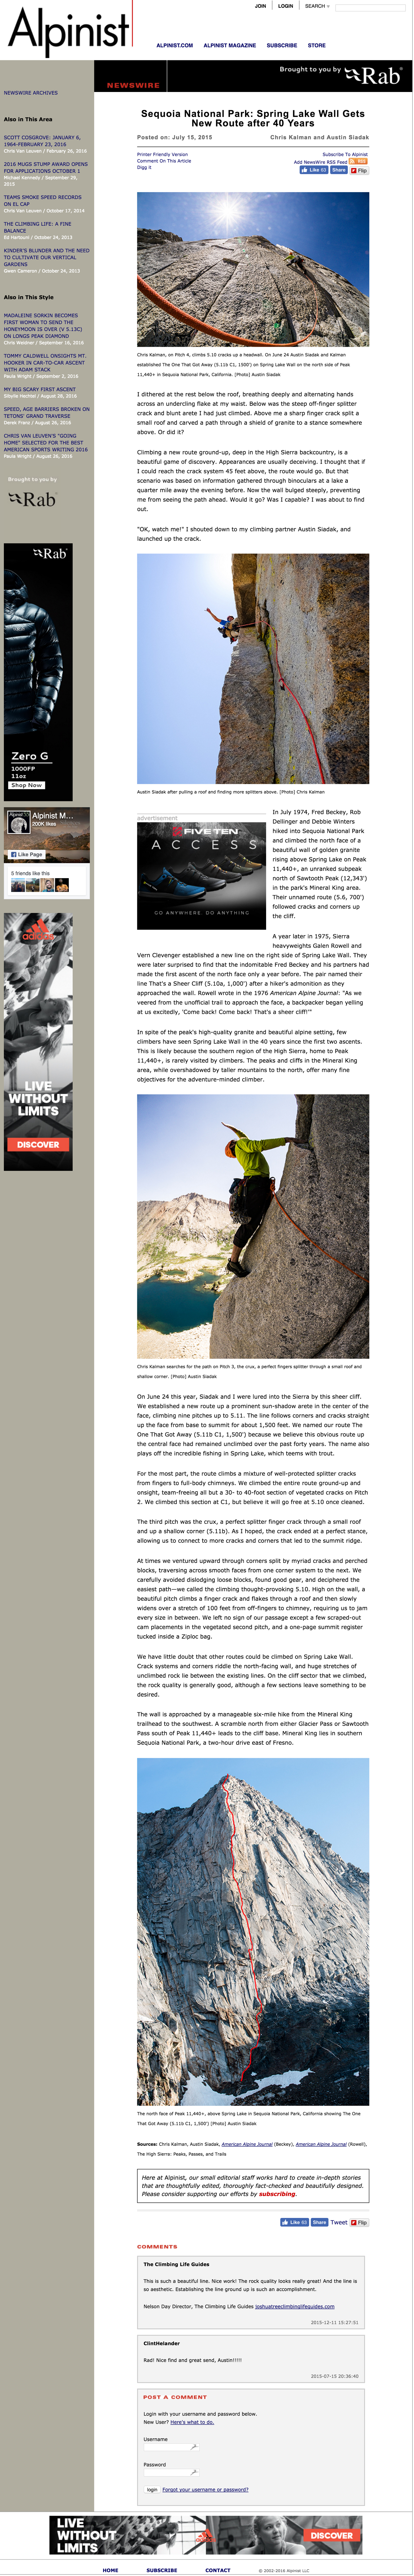 alpinist - Sequoia National Park  Spring Lake Wall Gets New Route after 40 Years   Alpinist.com.png